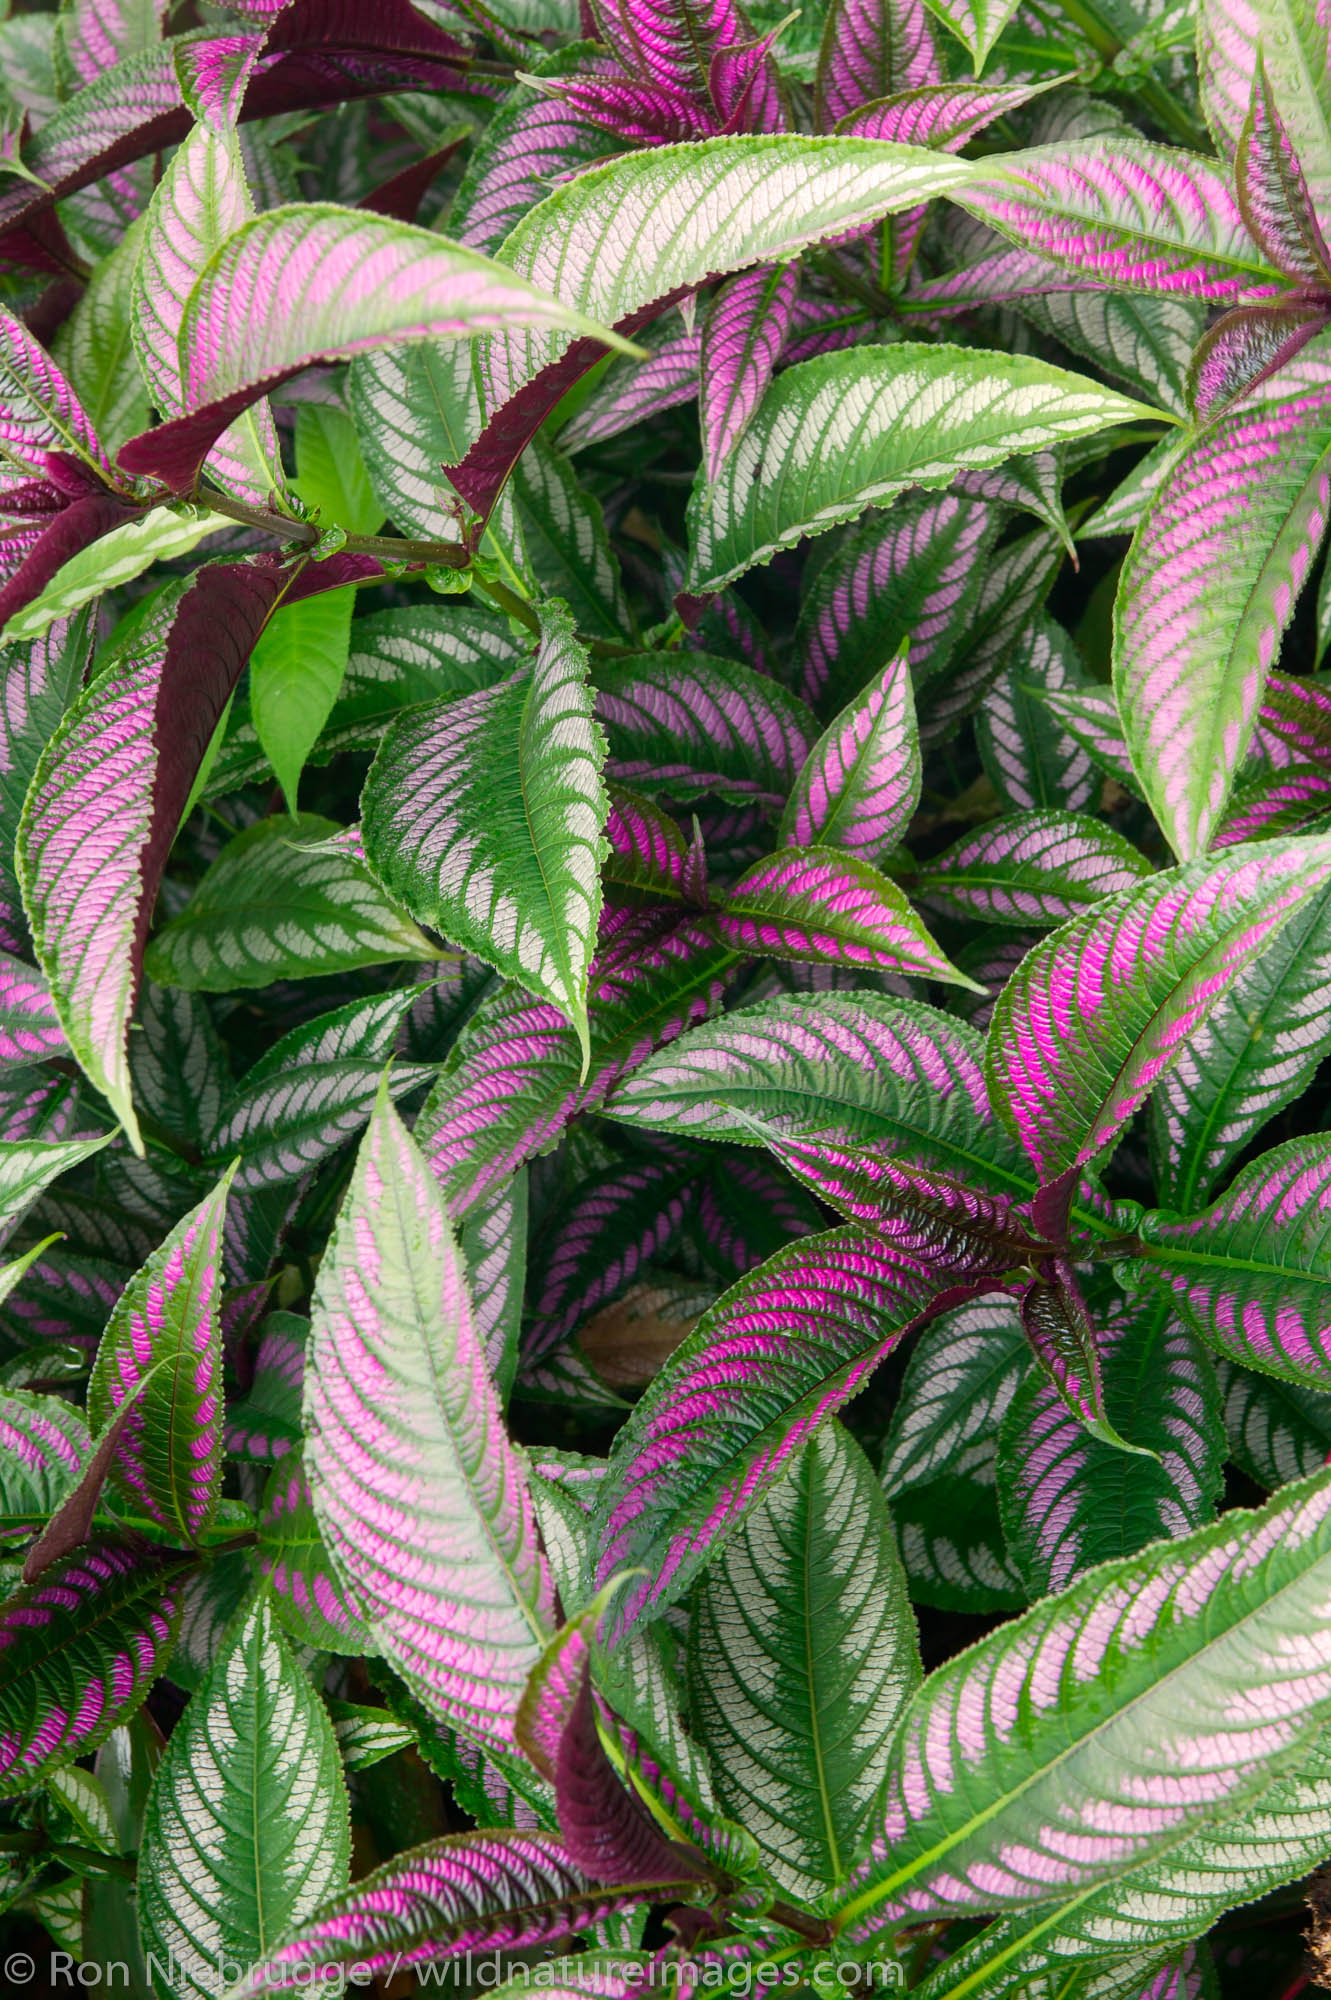 Colorful leaves on Plants at Tabacon Hot Spring Resort and Spa, Costa Rica.